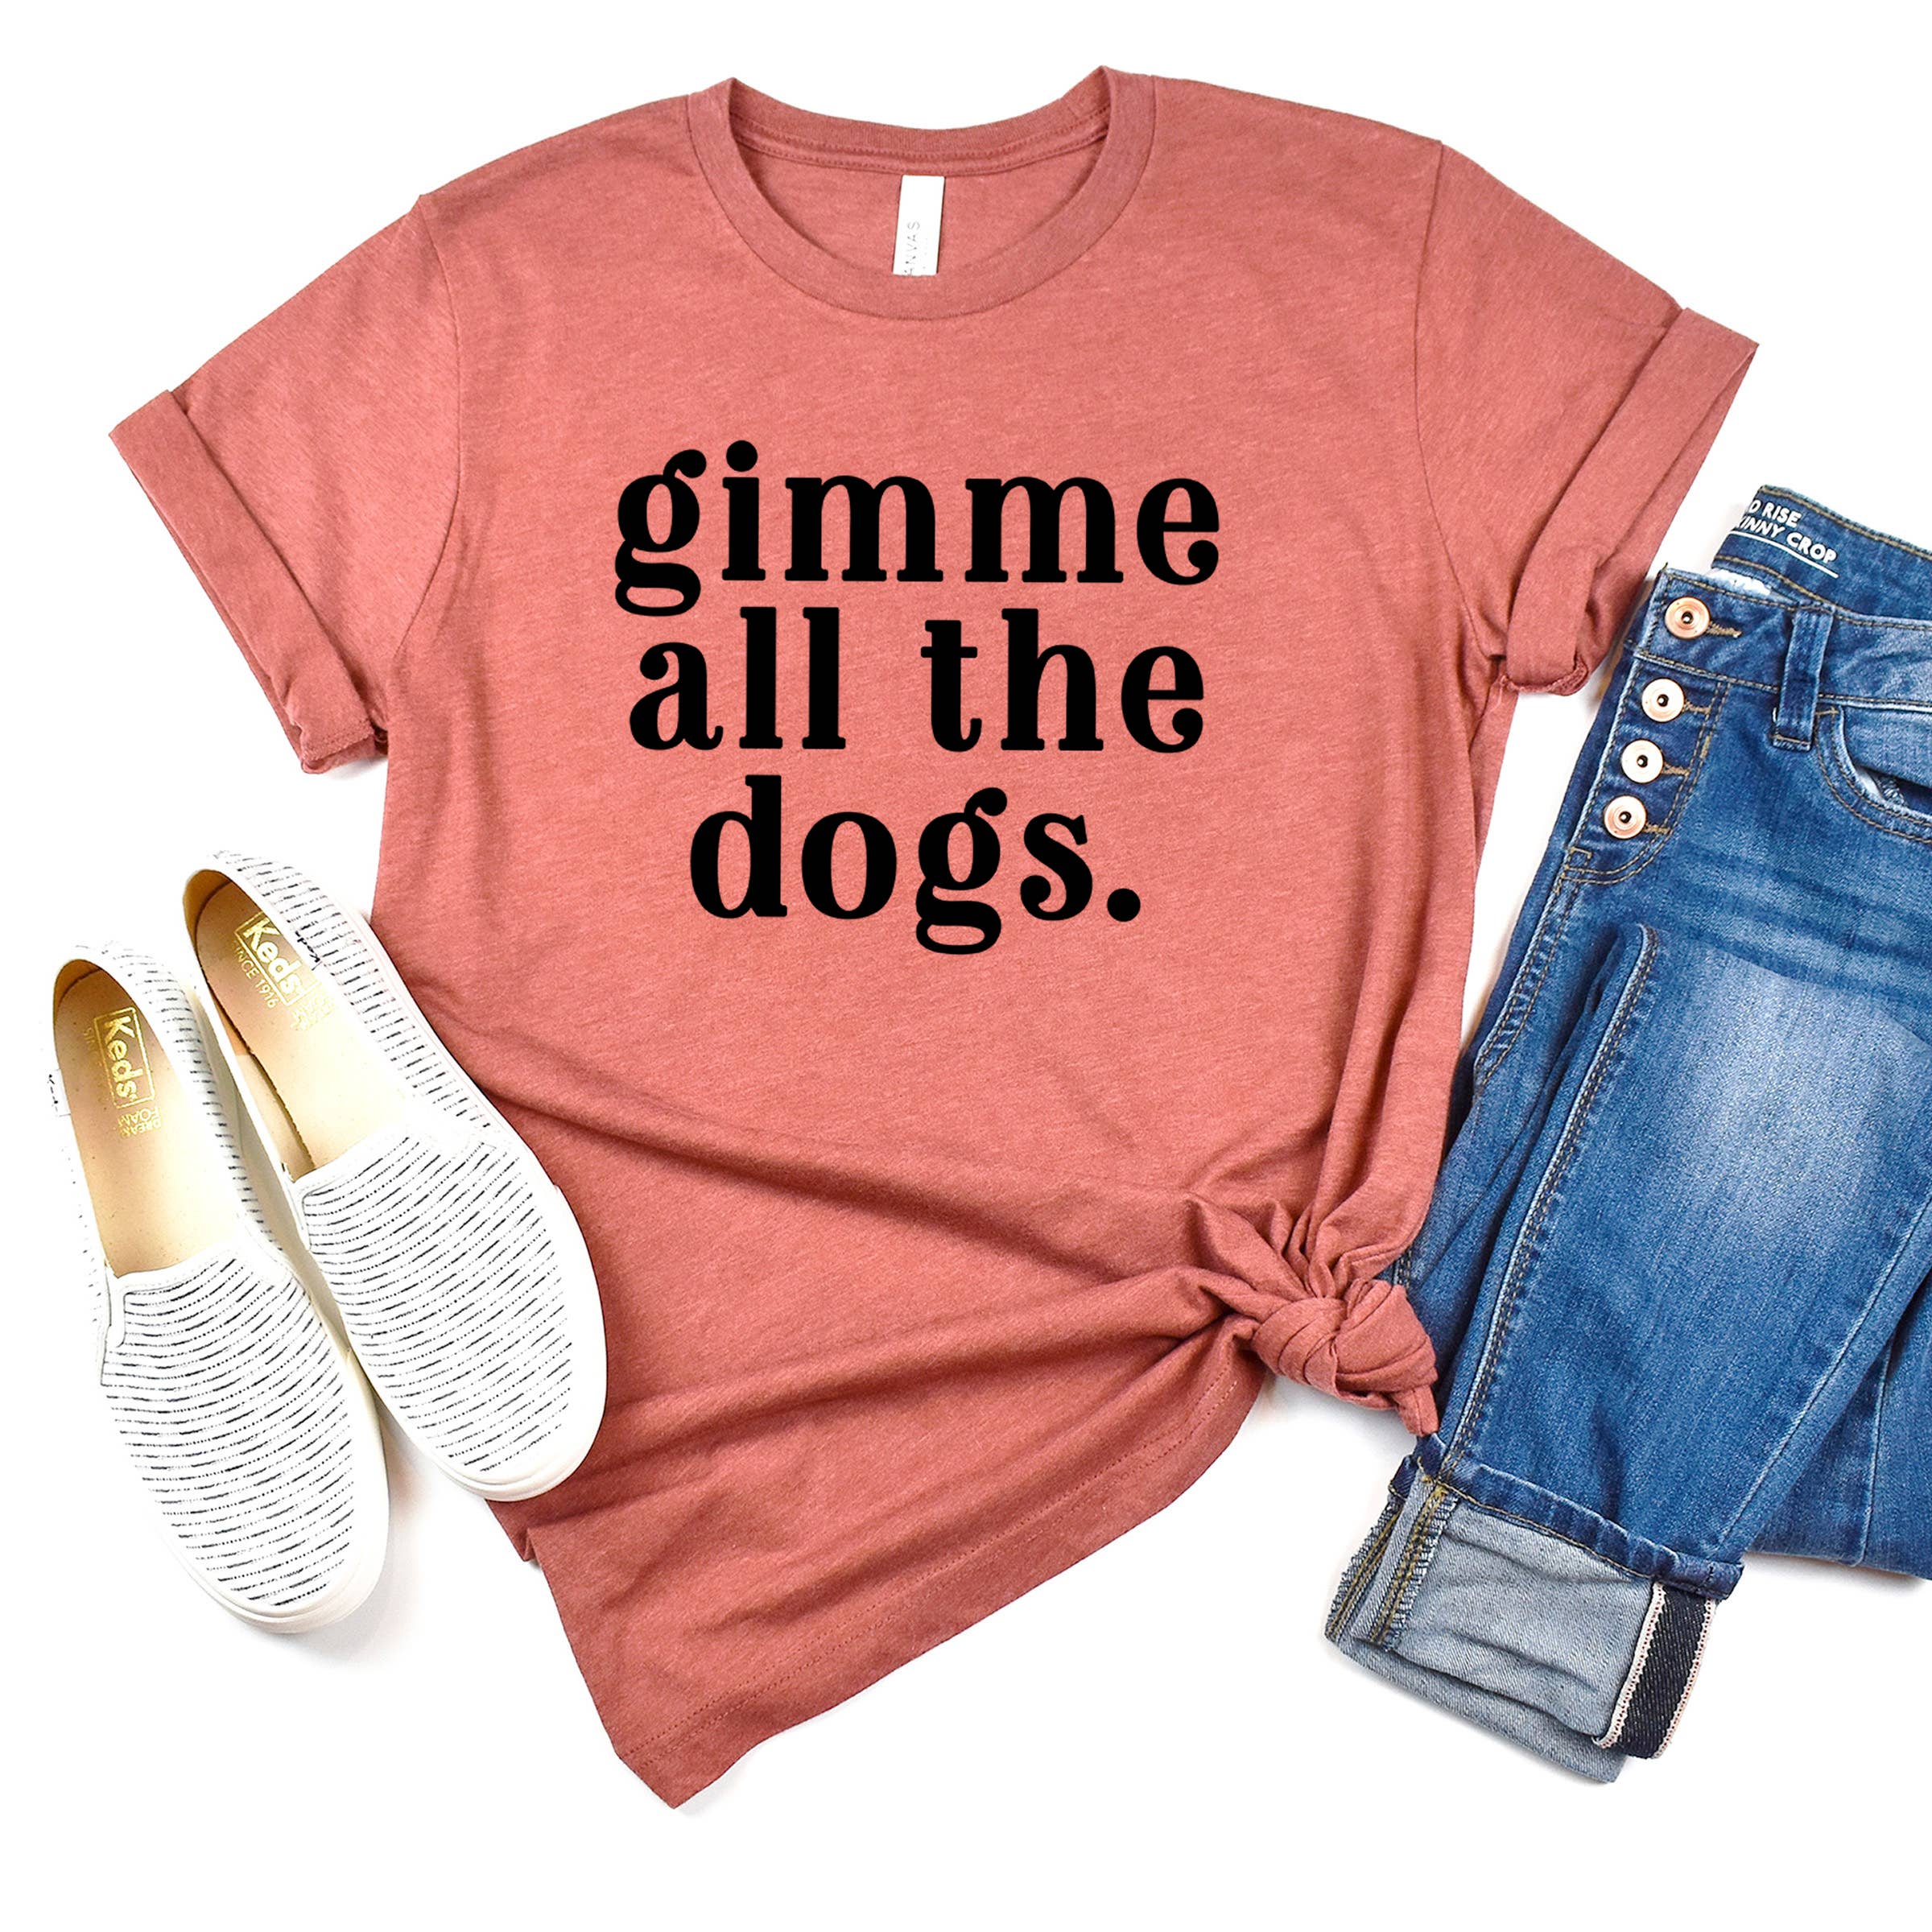 Gimme all the dogs T-shirt